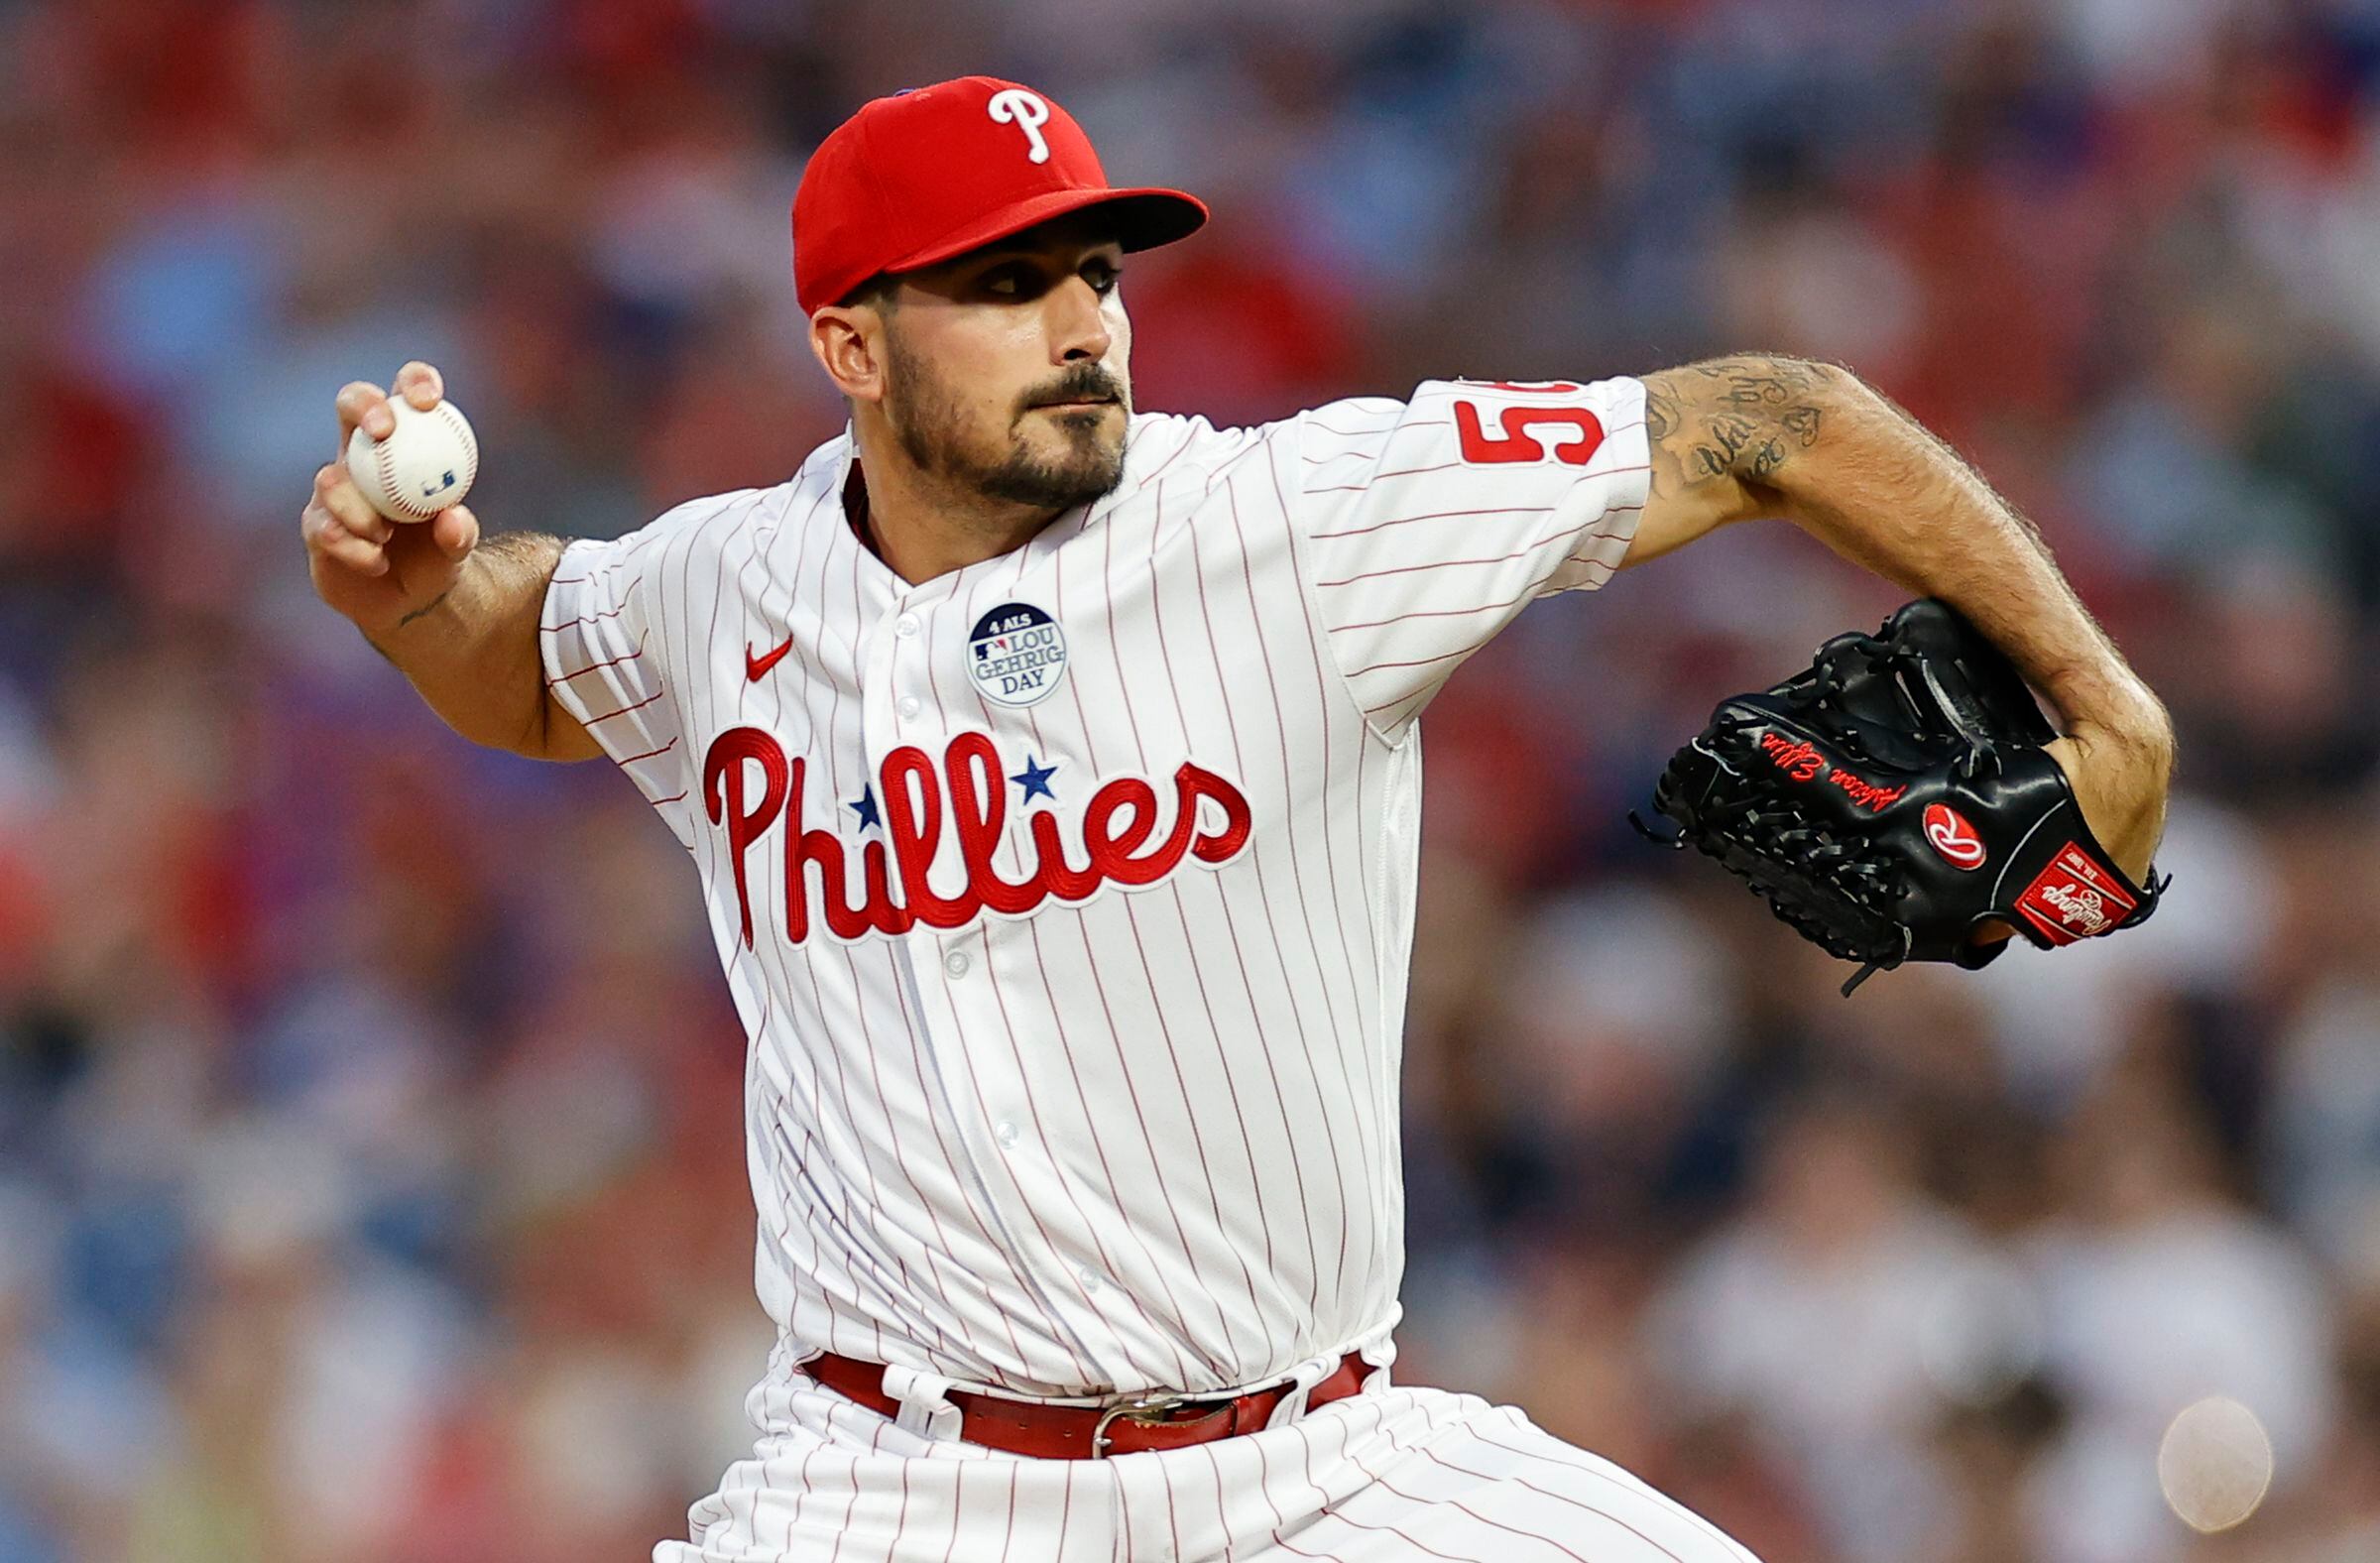 Castellanos drives in 4 to set single-season career-best of 103 RBIs as  Phillies top Mets 5-4 - The San Diego Union-Tribune